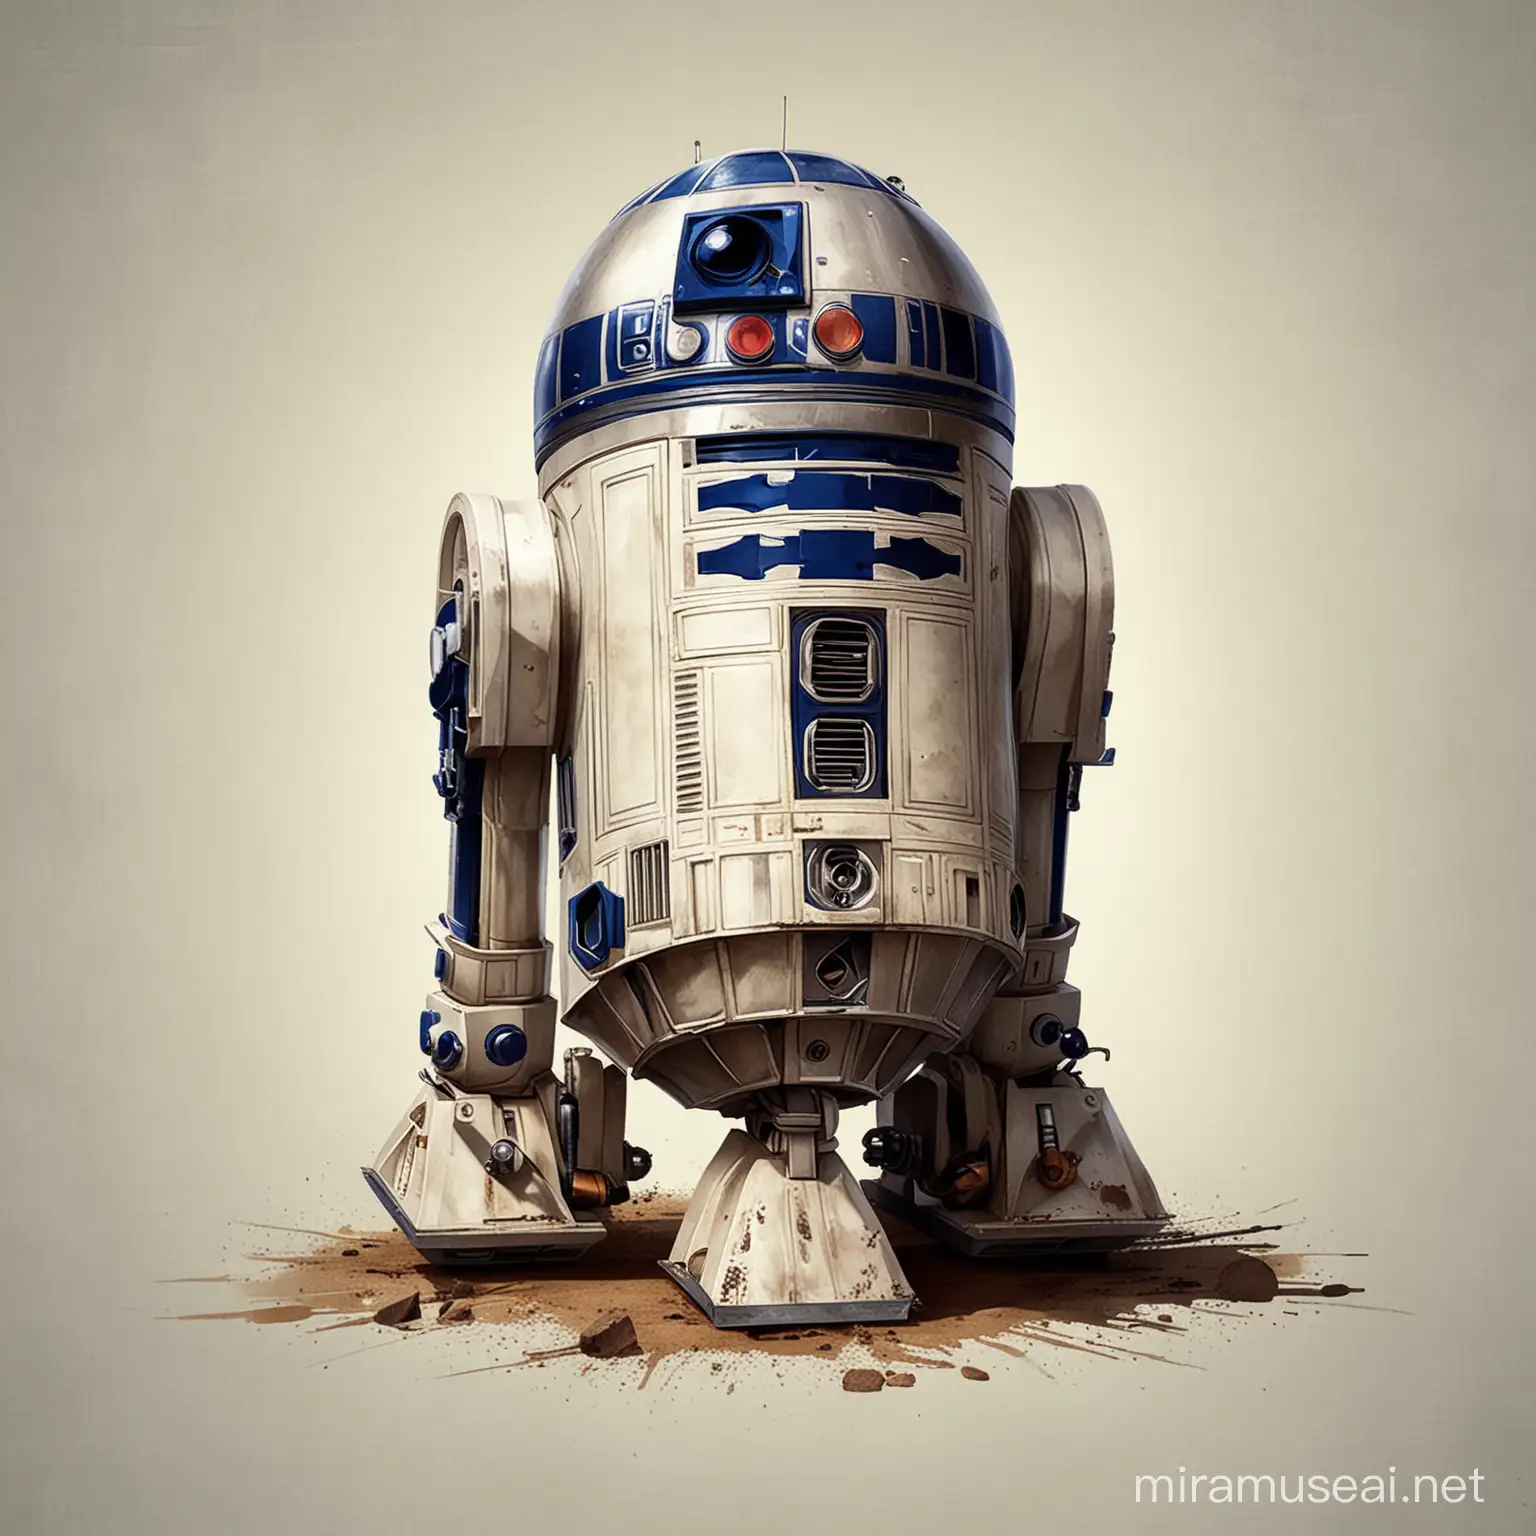 Star Wars R2D2 Wallpaper Futuristic Robot in Galactic Space